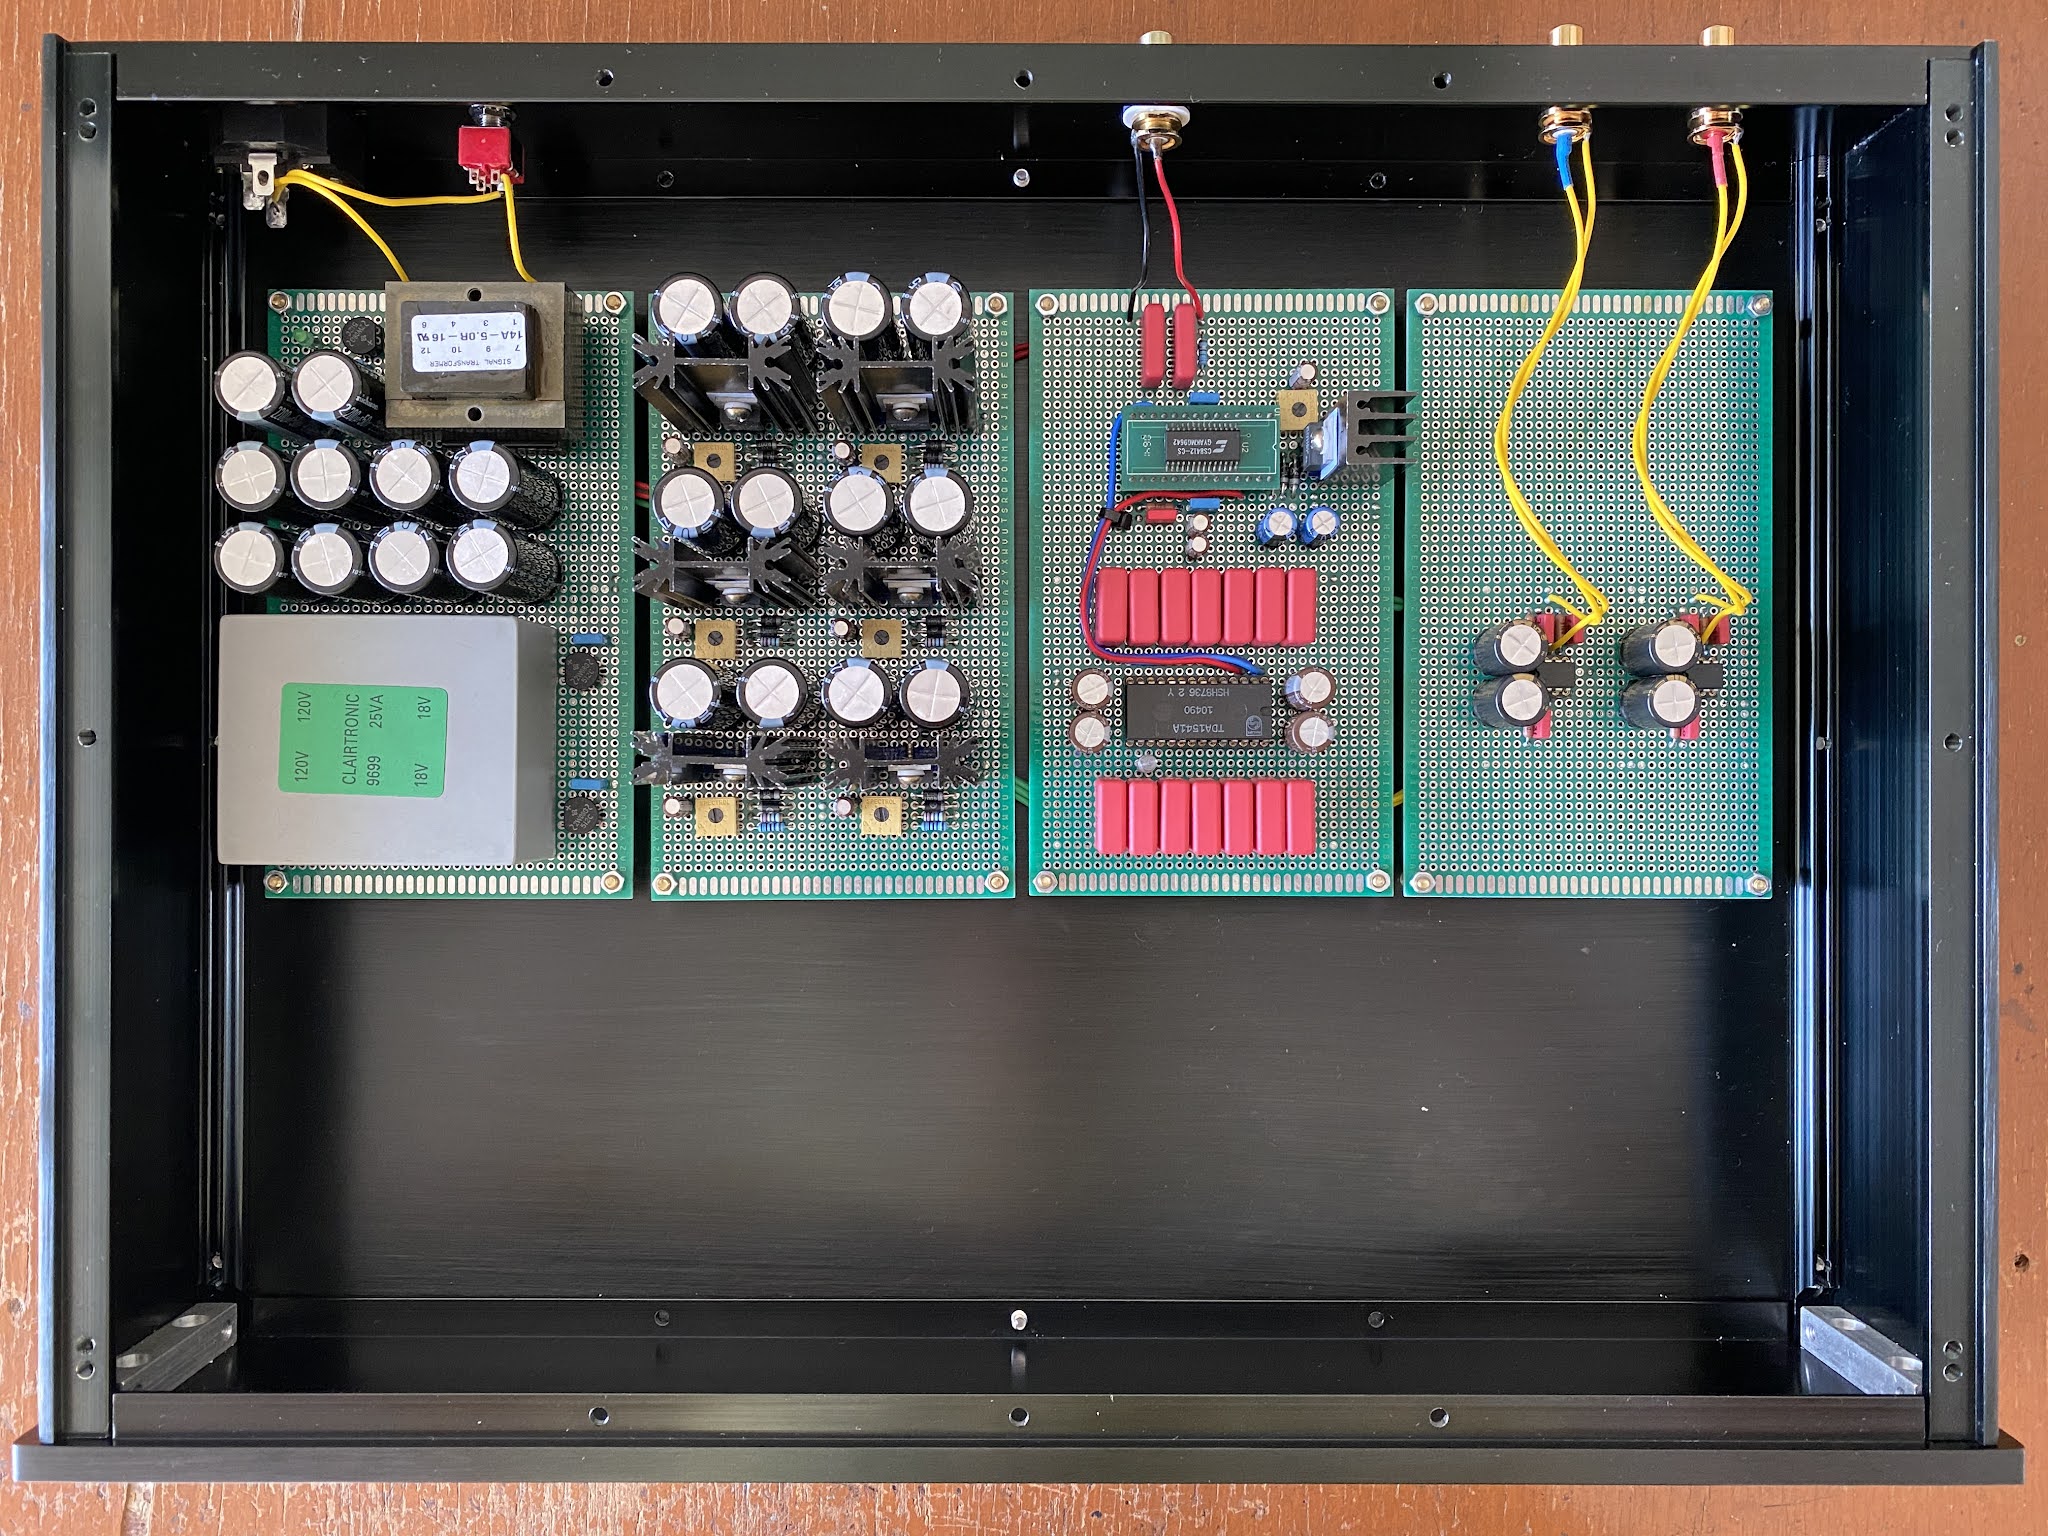 THE ORRONOCO AUDIO DIY: The Making Of Ultimate TDA1541 DAC (Part 2)